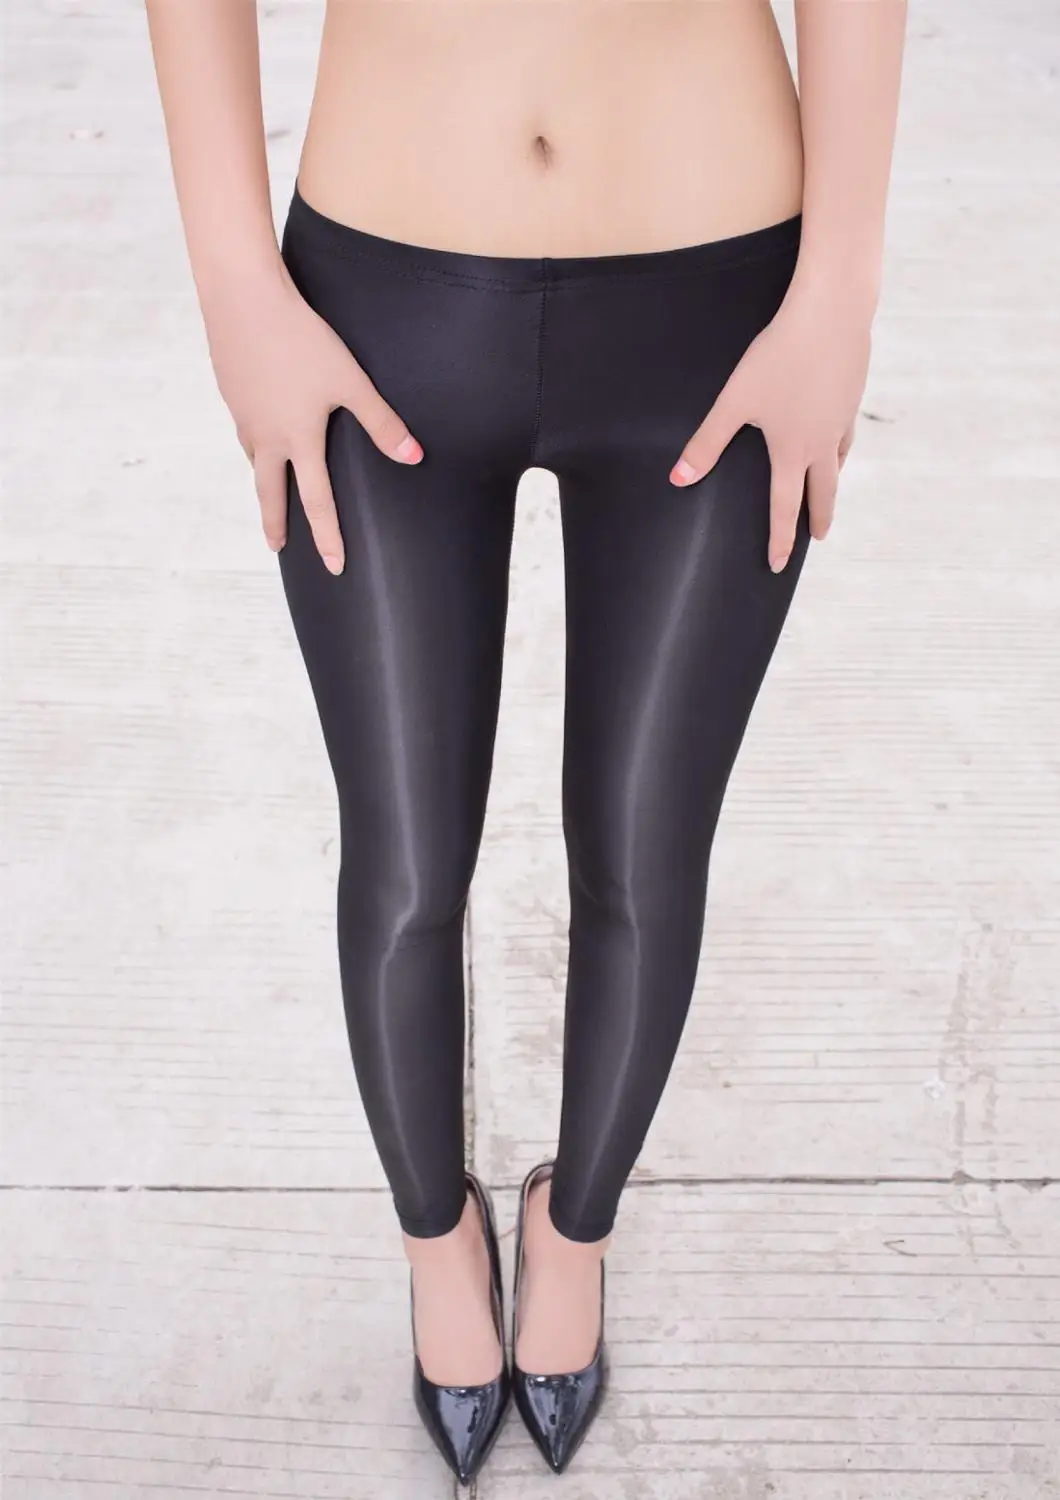 Sexy Crotchless Leggings See Through Transparent Exotic Hot Pencil